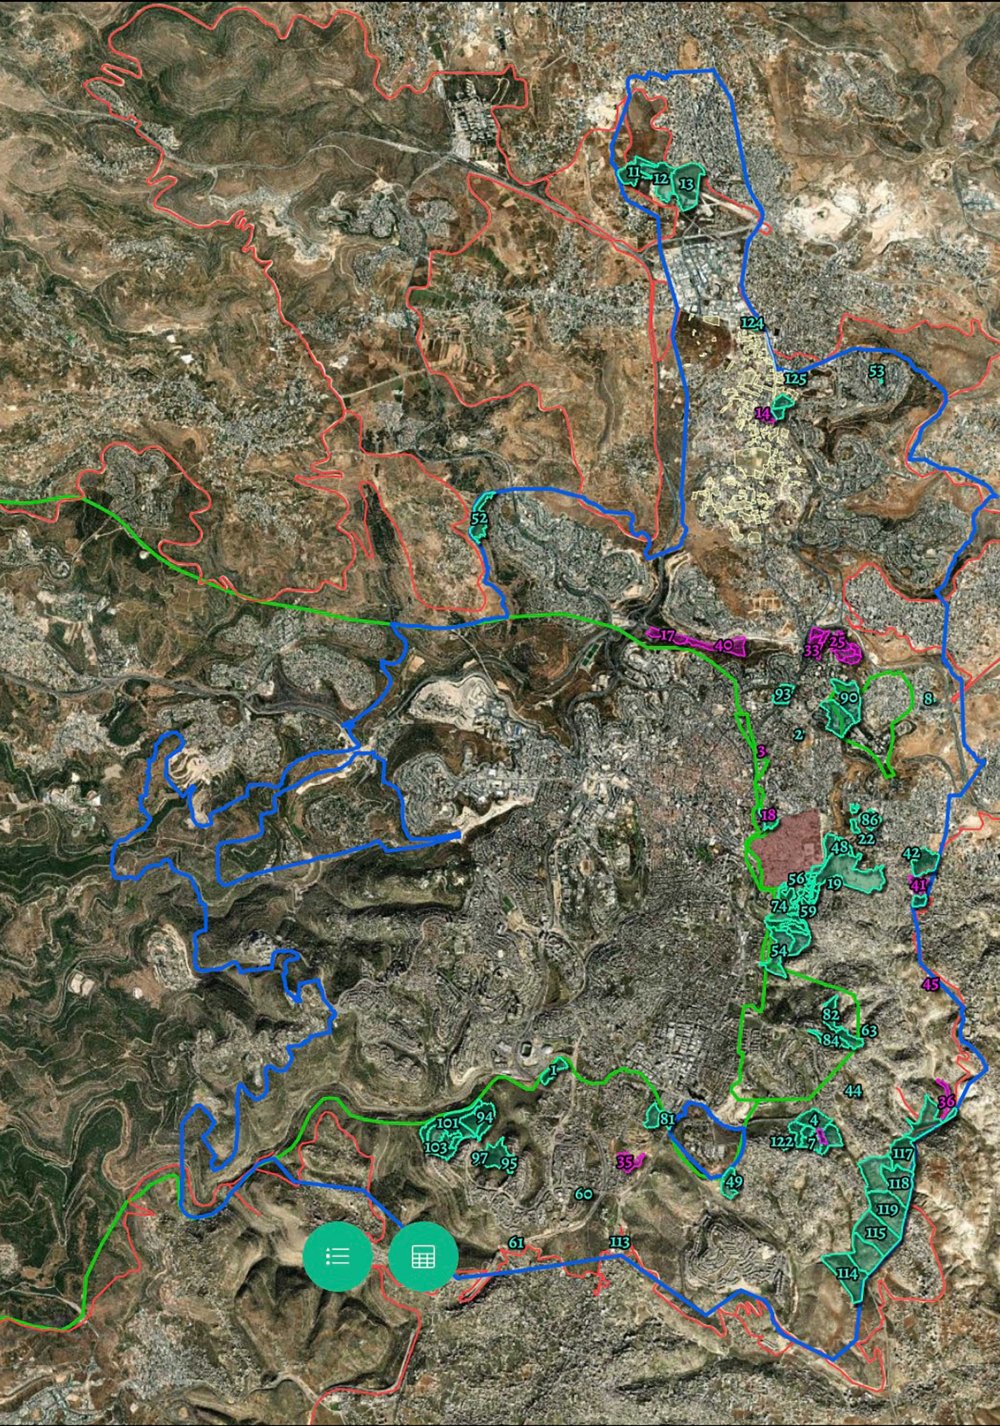 A screenshot of an interactive map of the various stages which privately held land across East Jerusalem is currently at in the renewed SOLT process, developed by Bimkom—Planners for Planning Rights